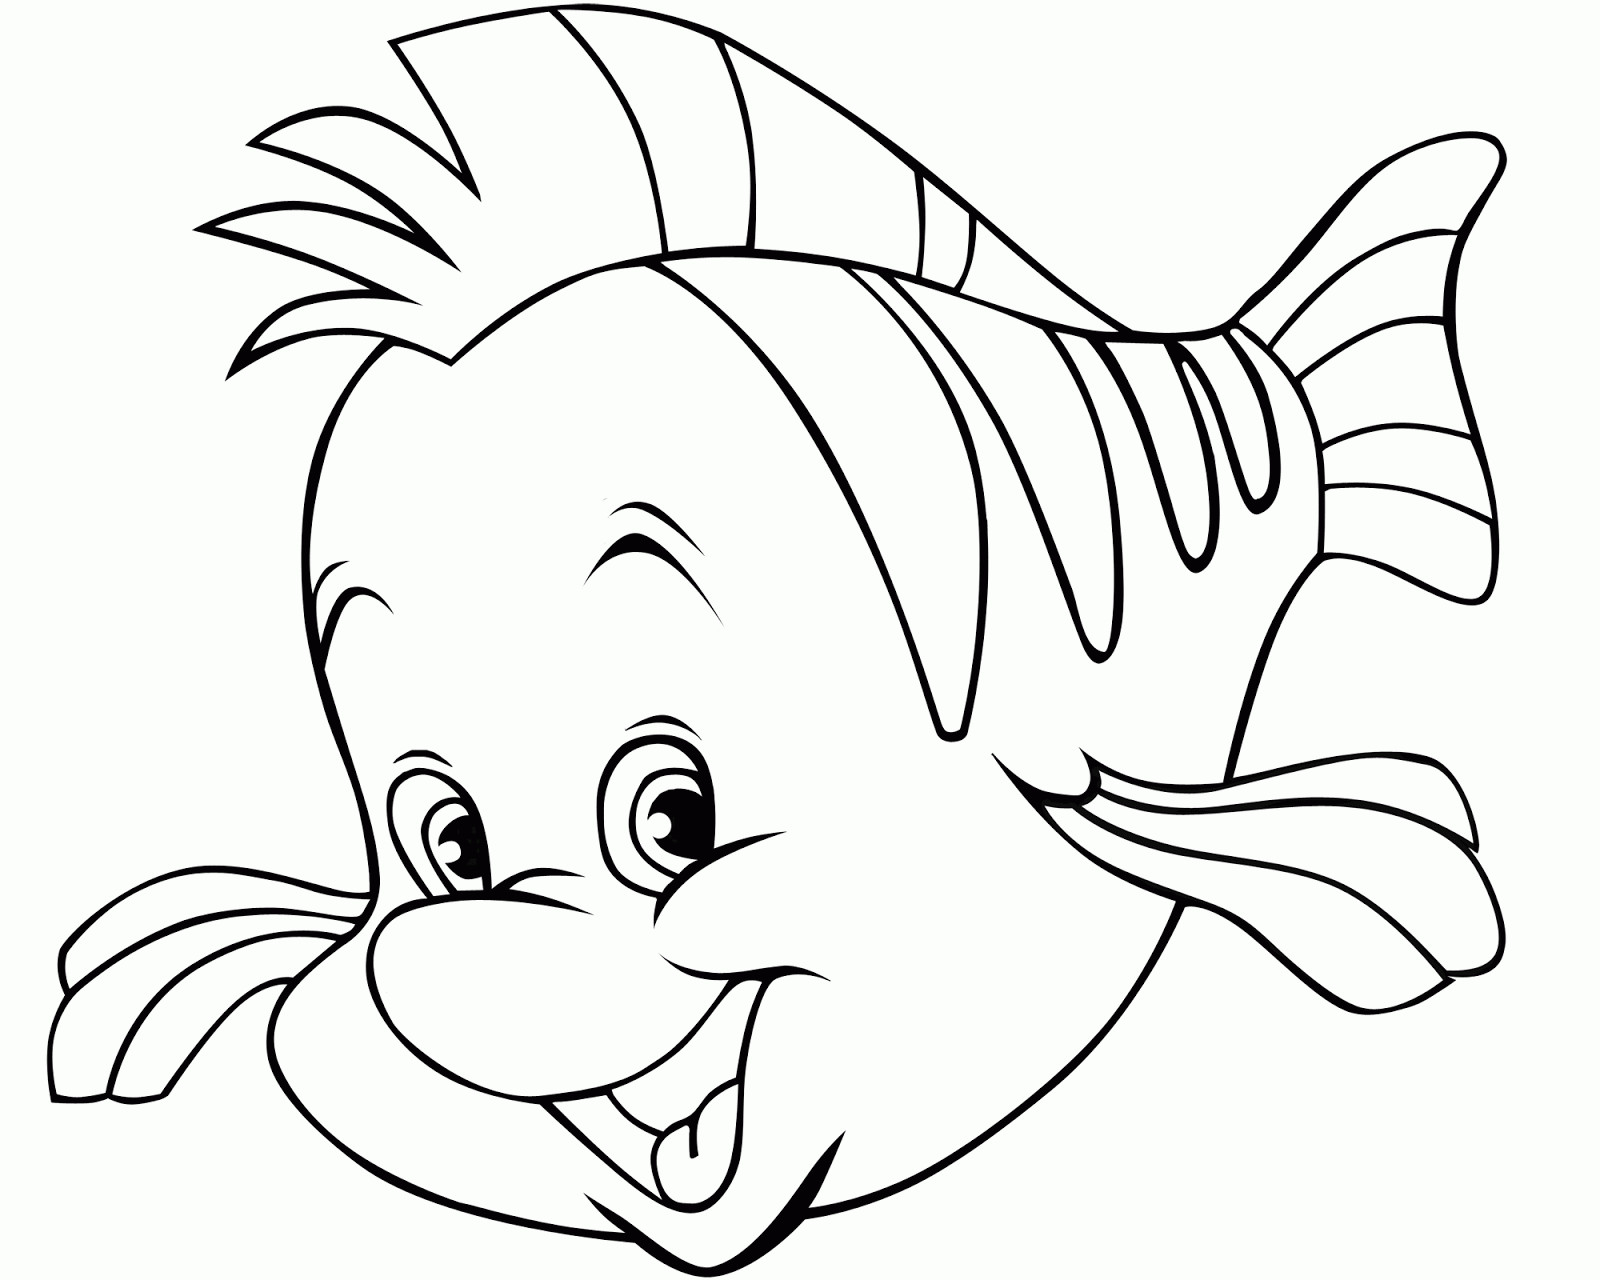 Printable Fish Coloring Pages
 Coloring Fish